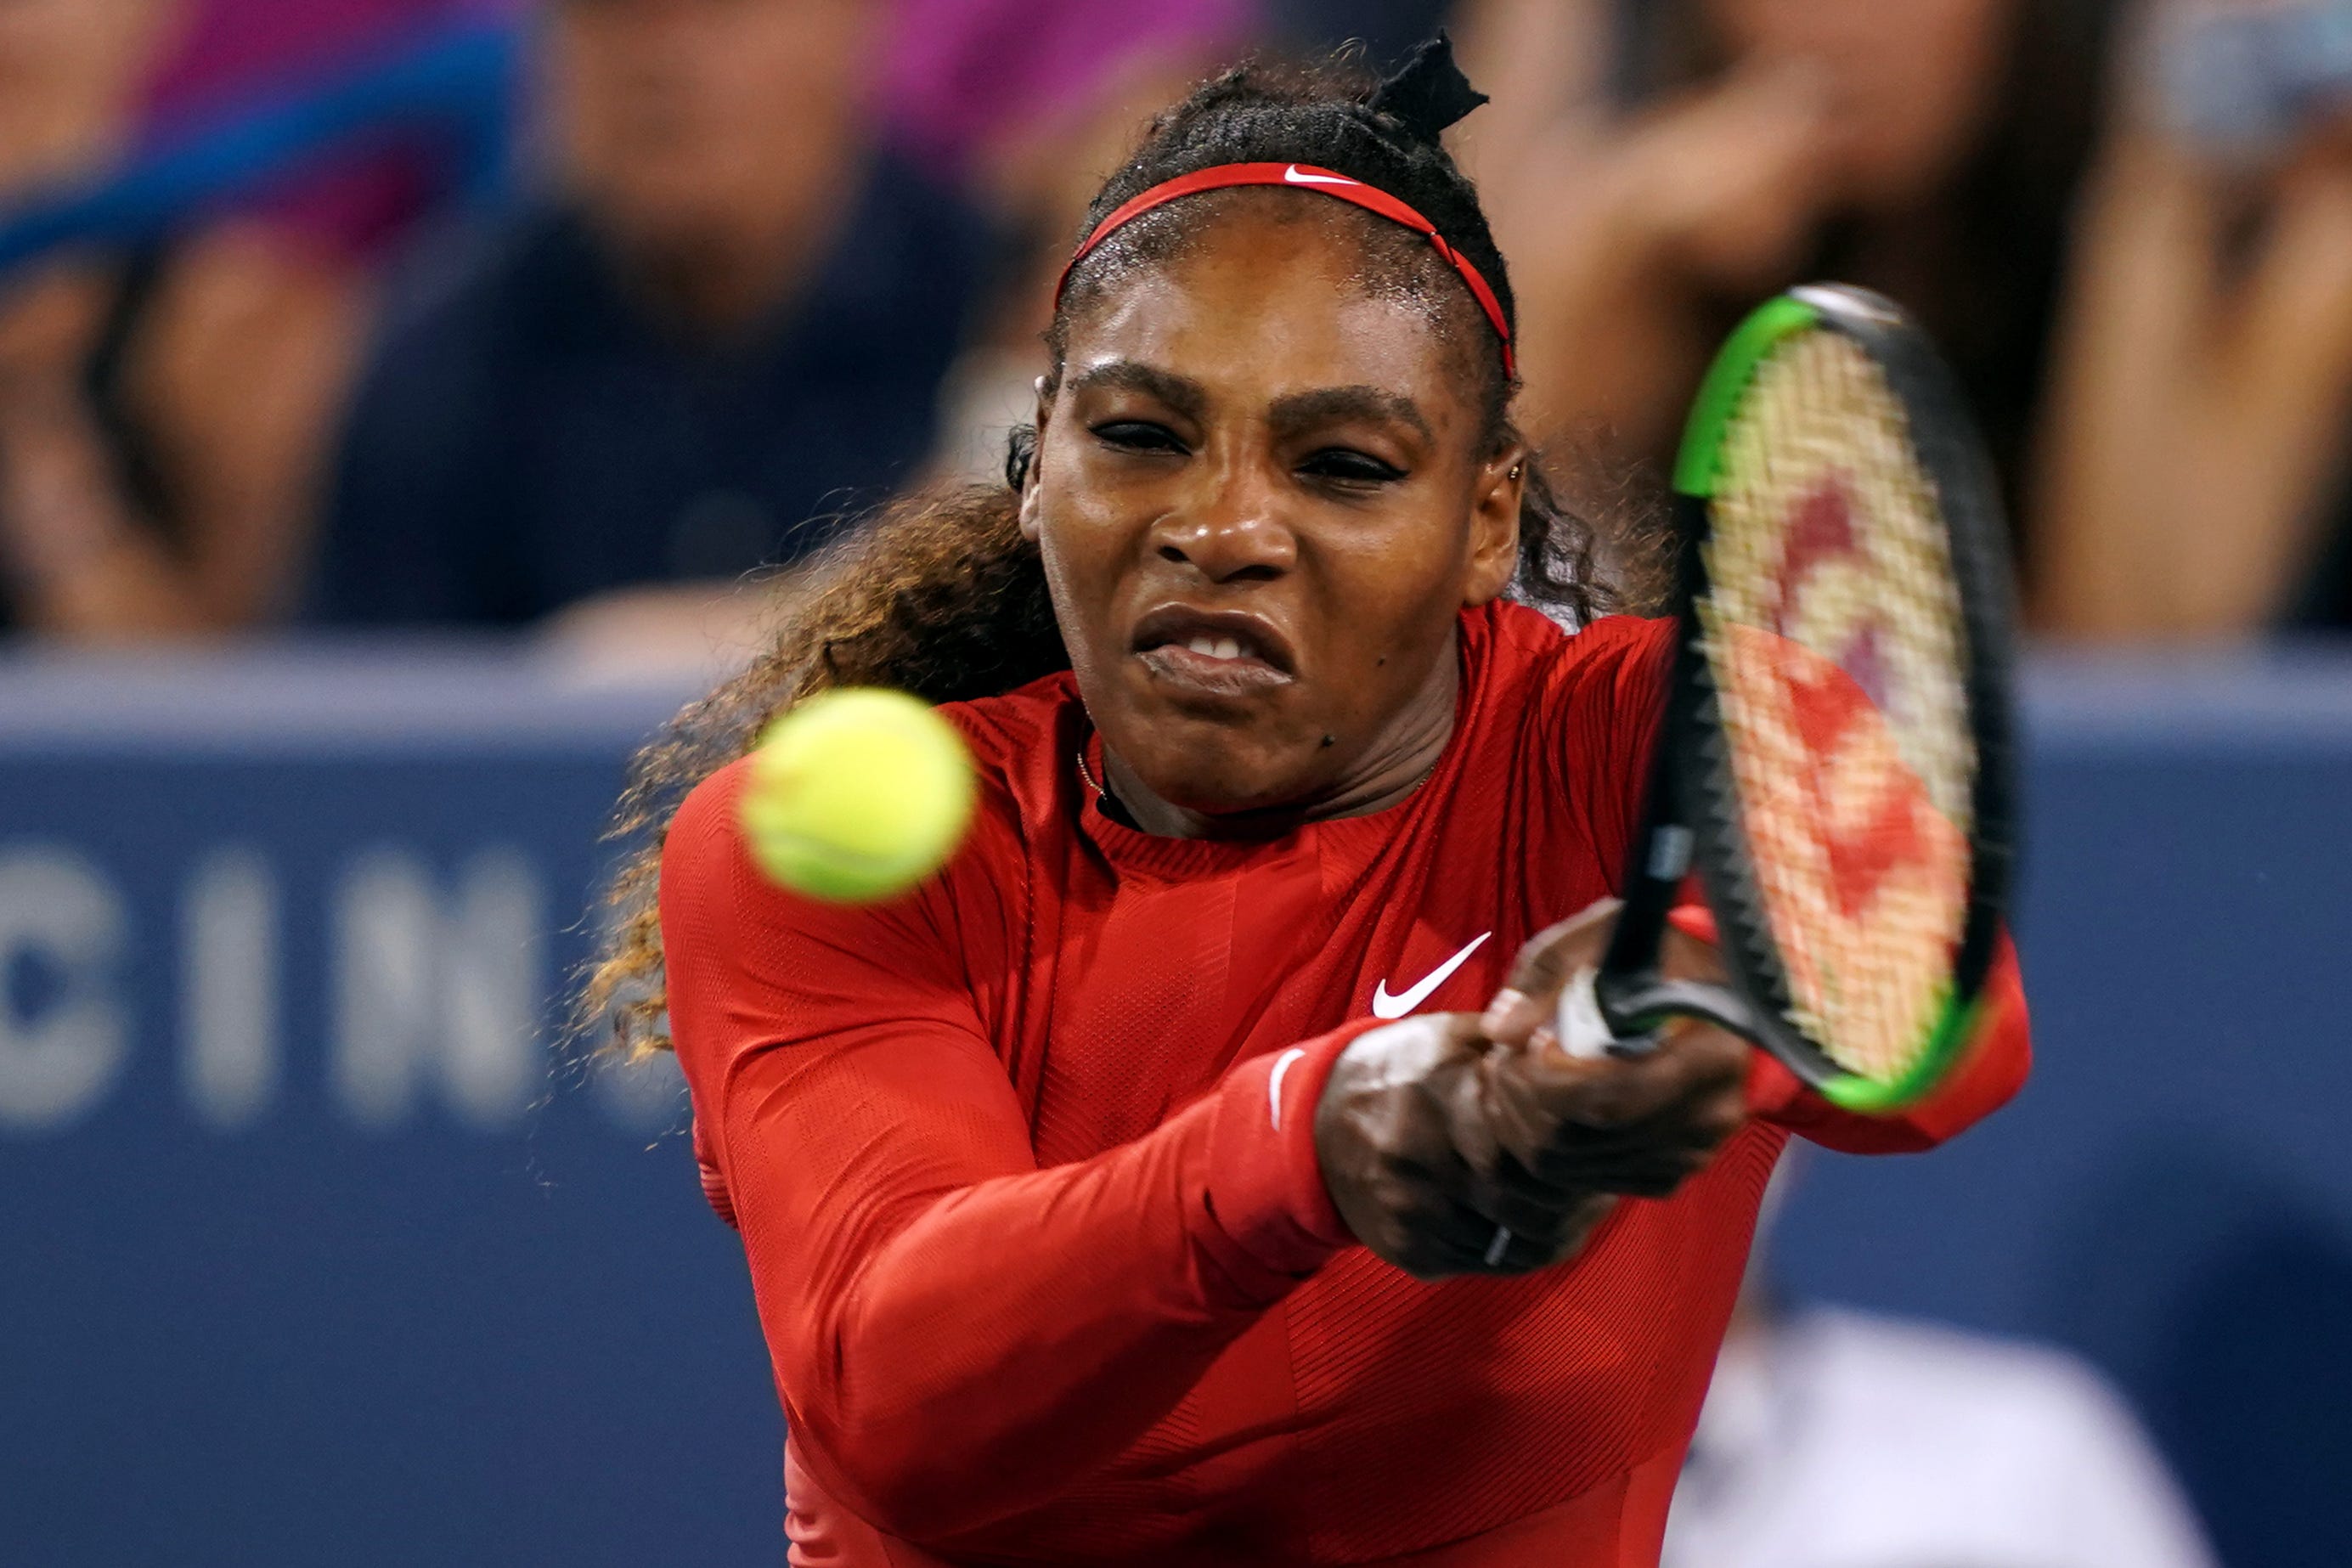 Serena Williams returns a shot against Petra Kvitova in the Western and Southern tennis open at Lindner Family Tennis Center in Mason, Ohio.